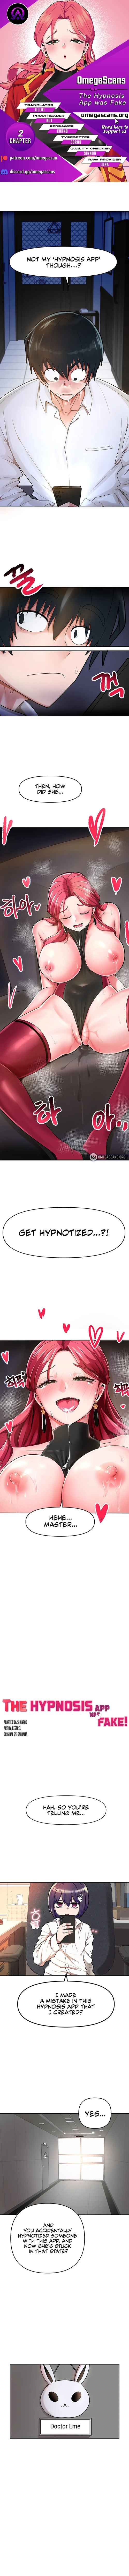 The Hypnosis App was Fake - Chapter 2 Page 1